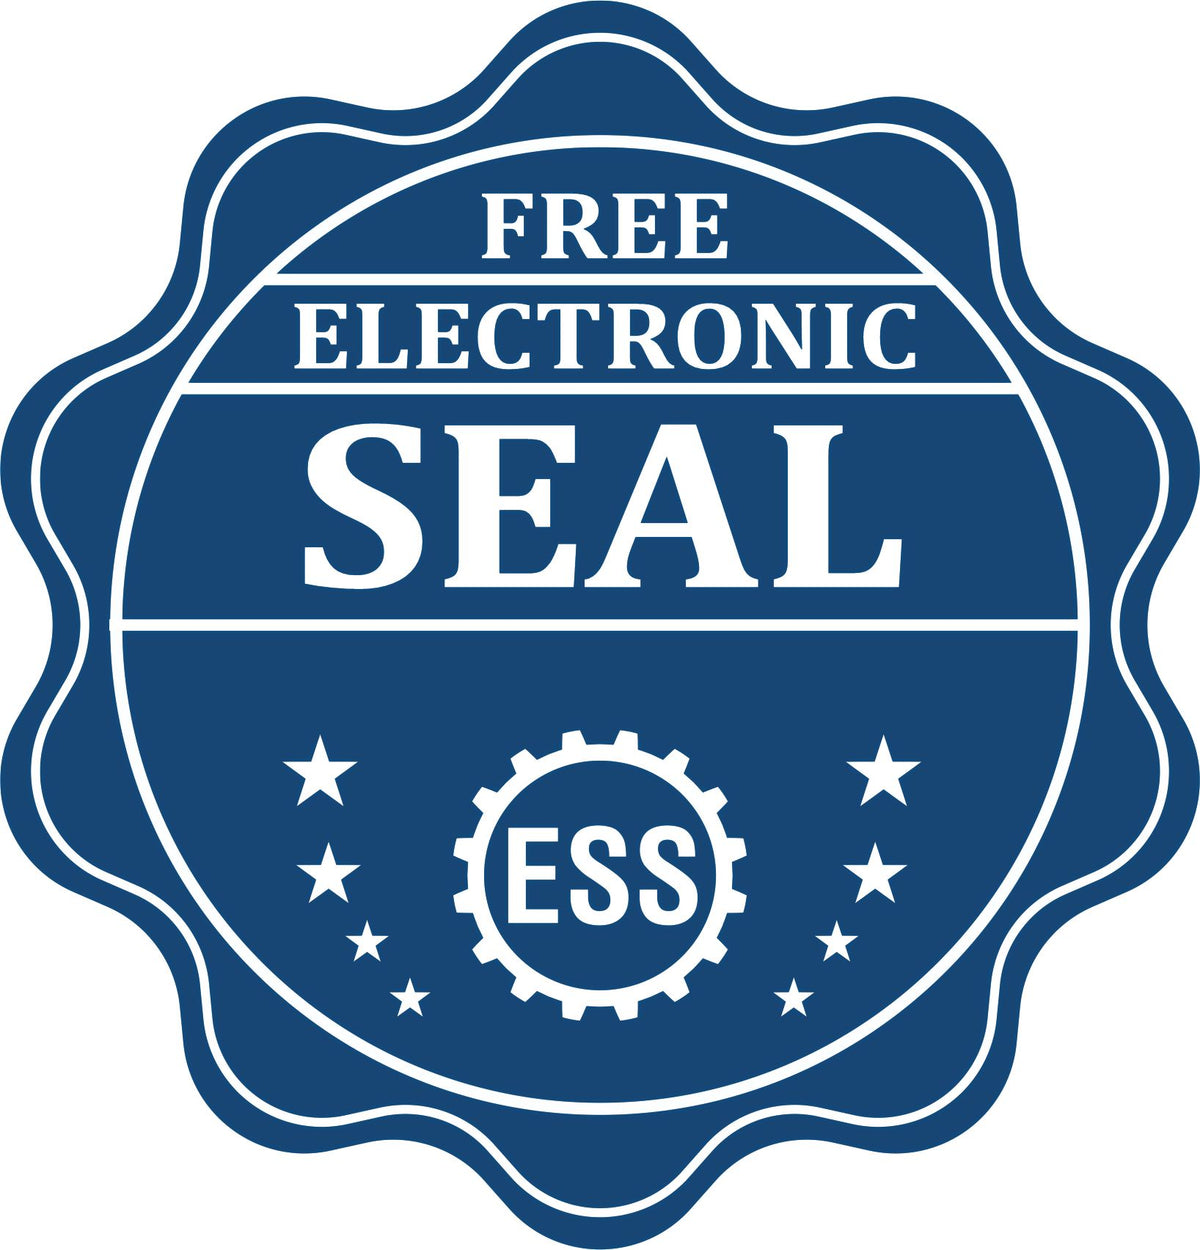 A badge showing a free electronic seal for the MaxLight Premium Pre-Inked North Carolina State Seal Notarial Stamp with stars and the ESS gear on the emblem.